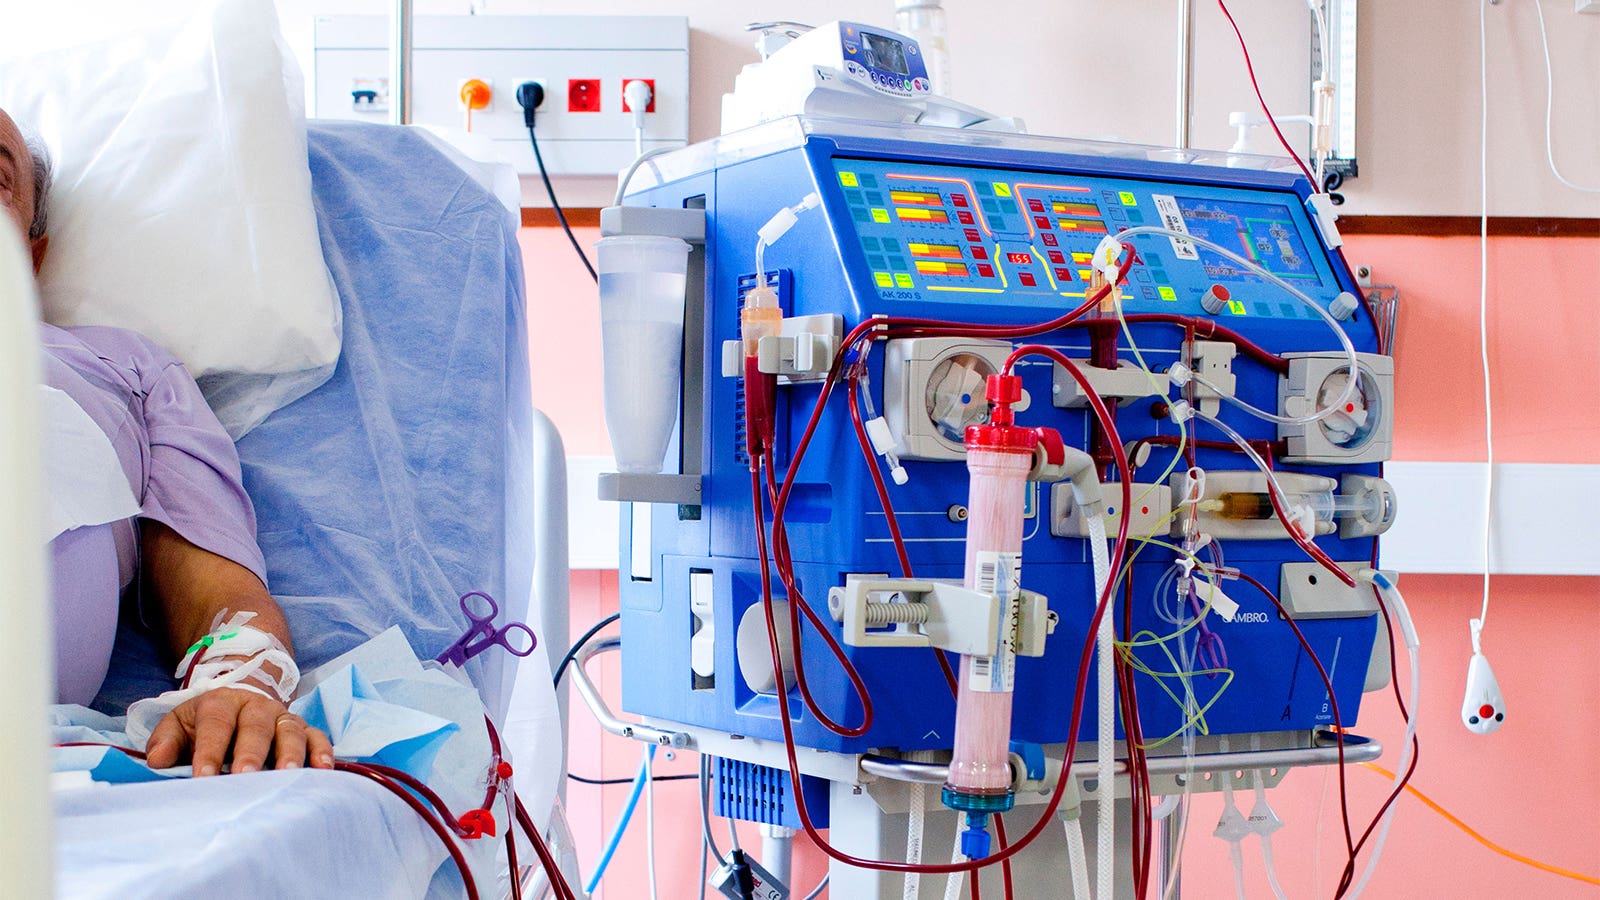 Primary Care Strategy Fails to Reduce Kidney-Dysfunction Triad Hospitalizations